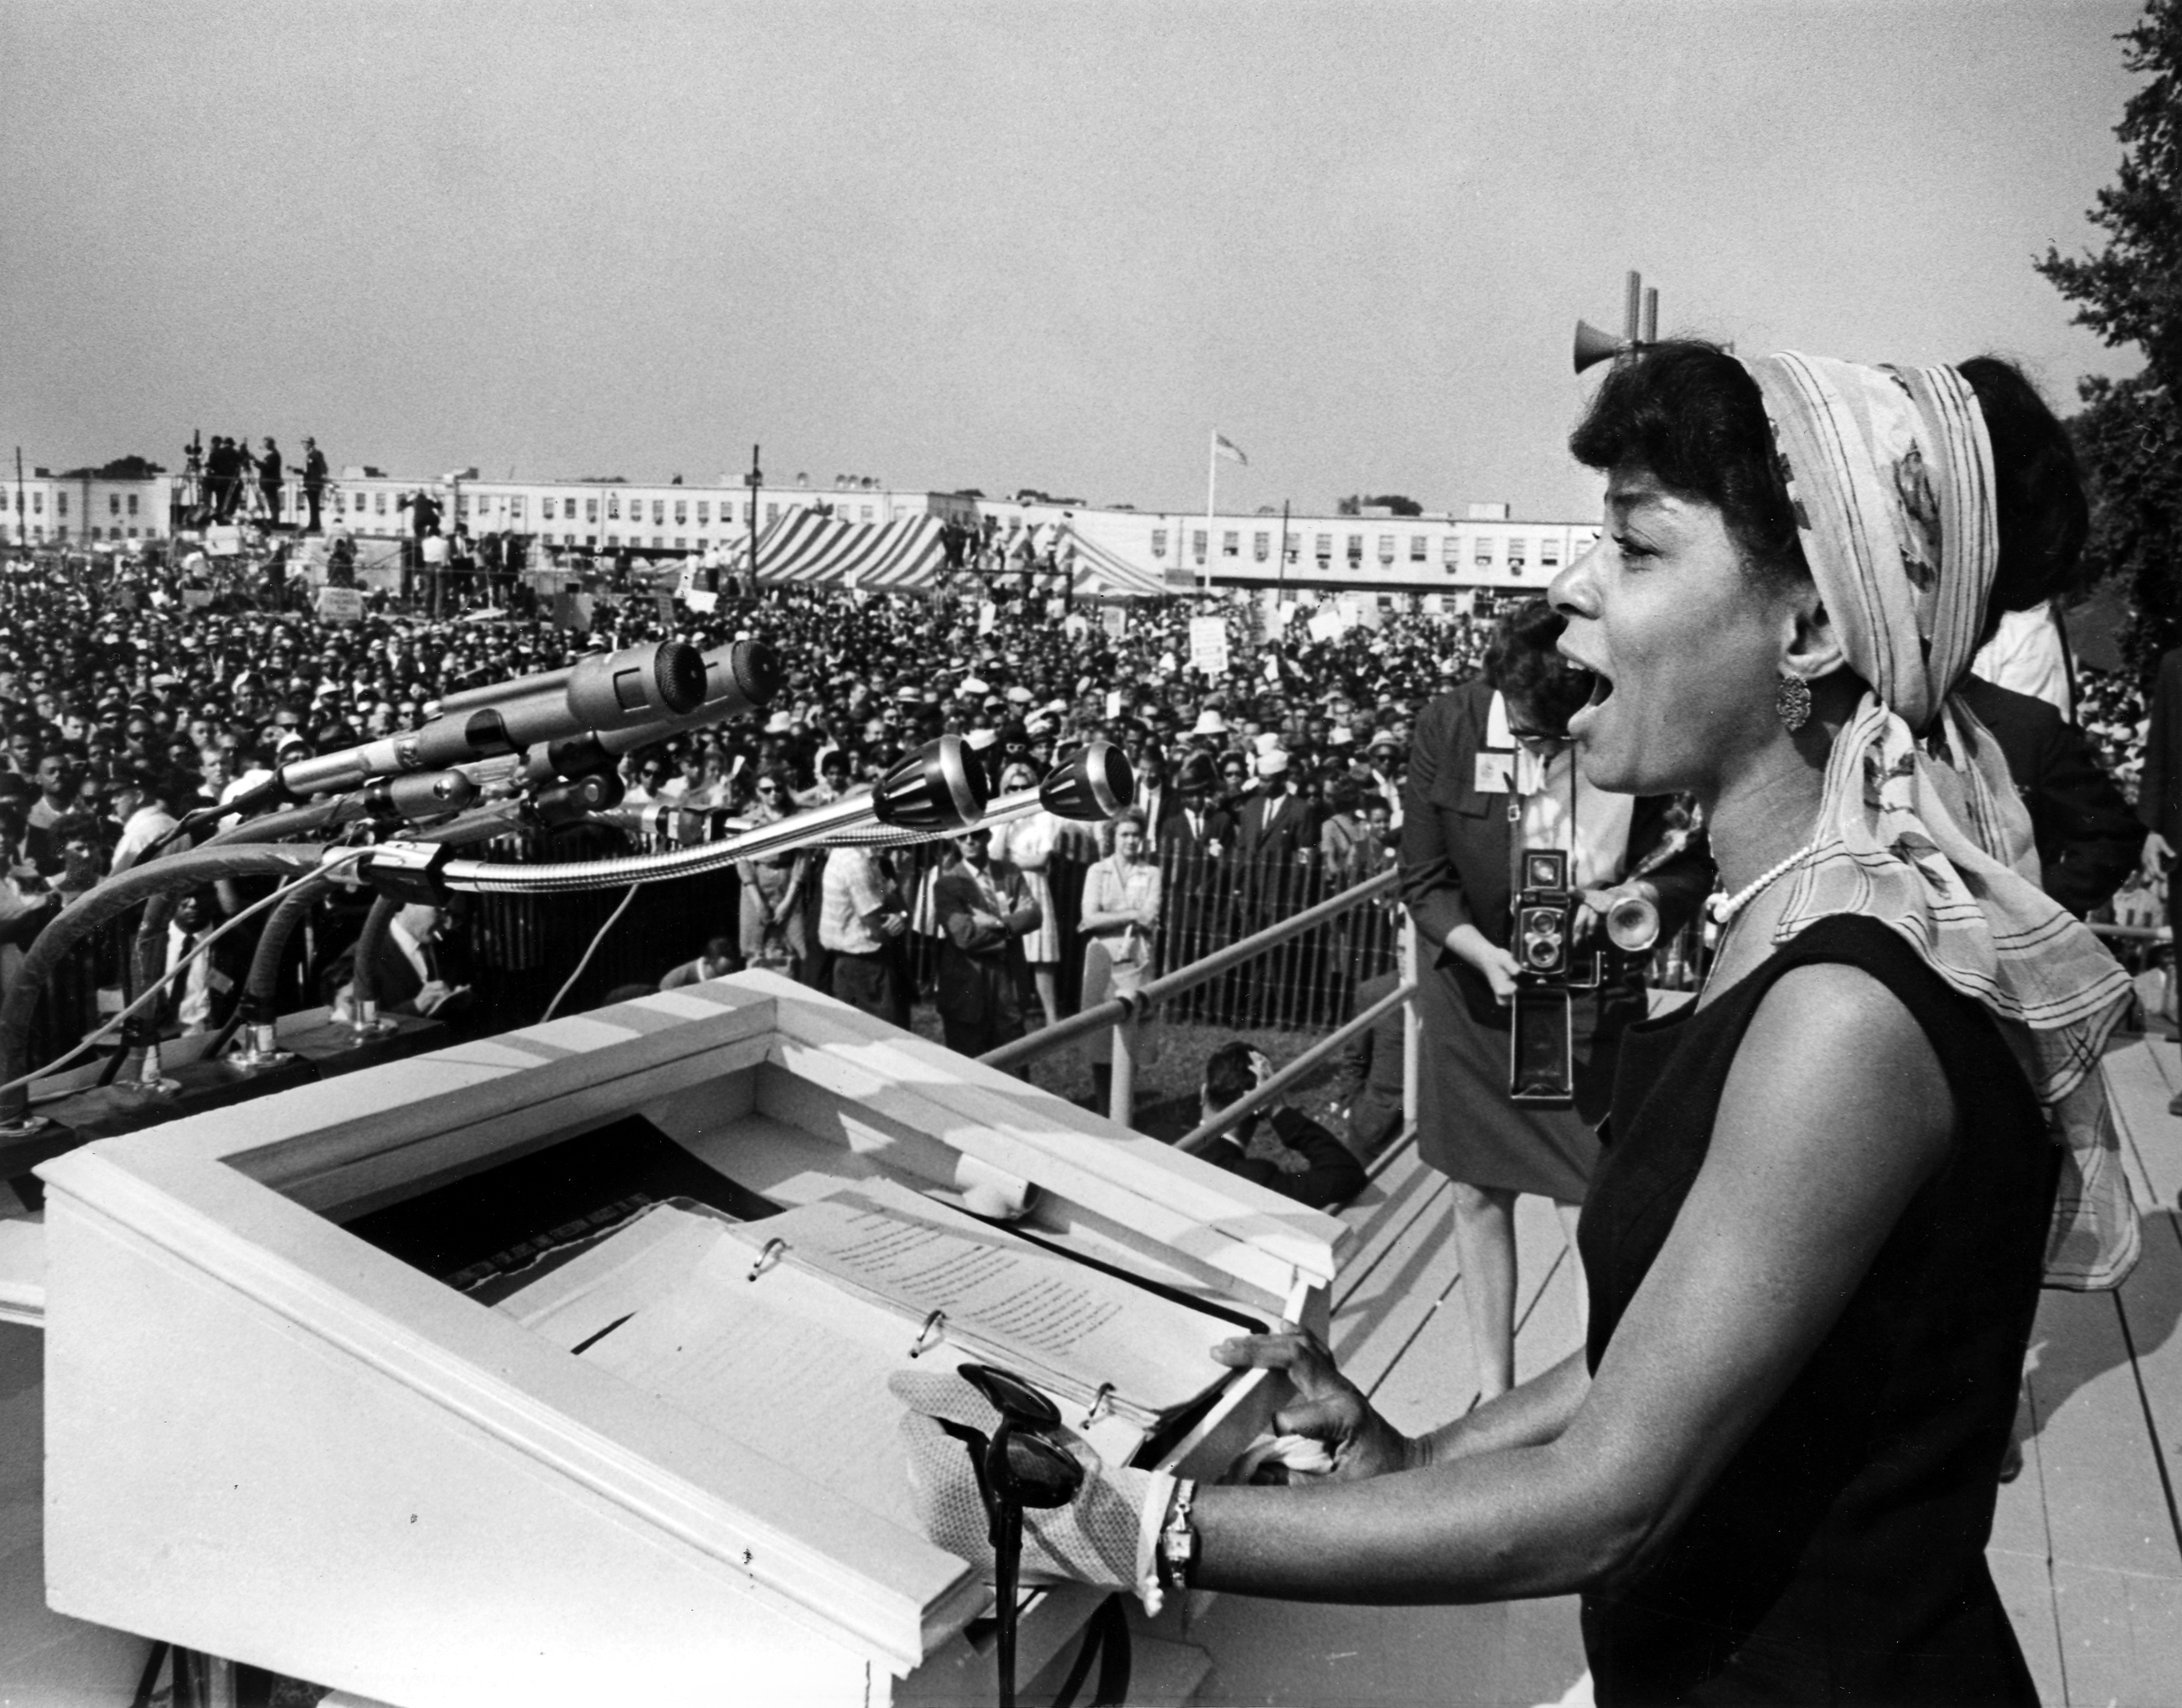 Ruby Dee was also a civil rights activist. Above, Dee is seen giving a reading at Martin Luther King Jr.'s 1963 March on Washington in Washington, DC on August 28, 1963.